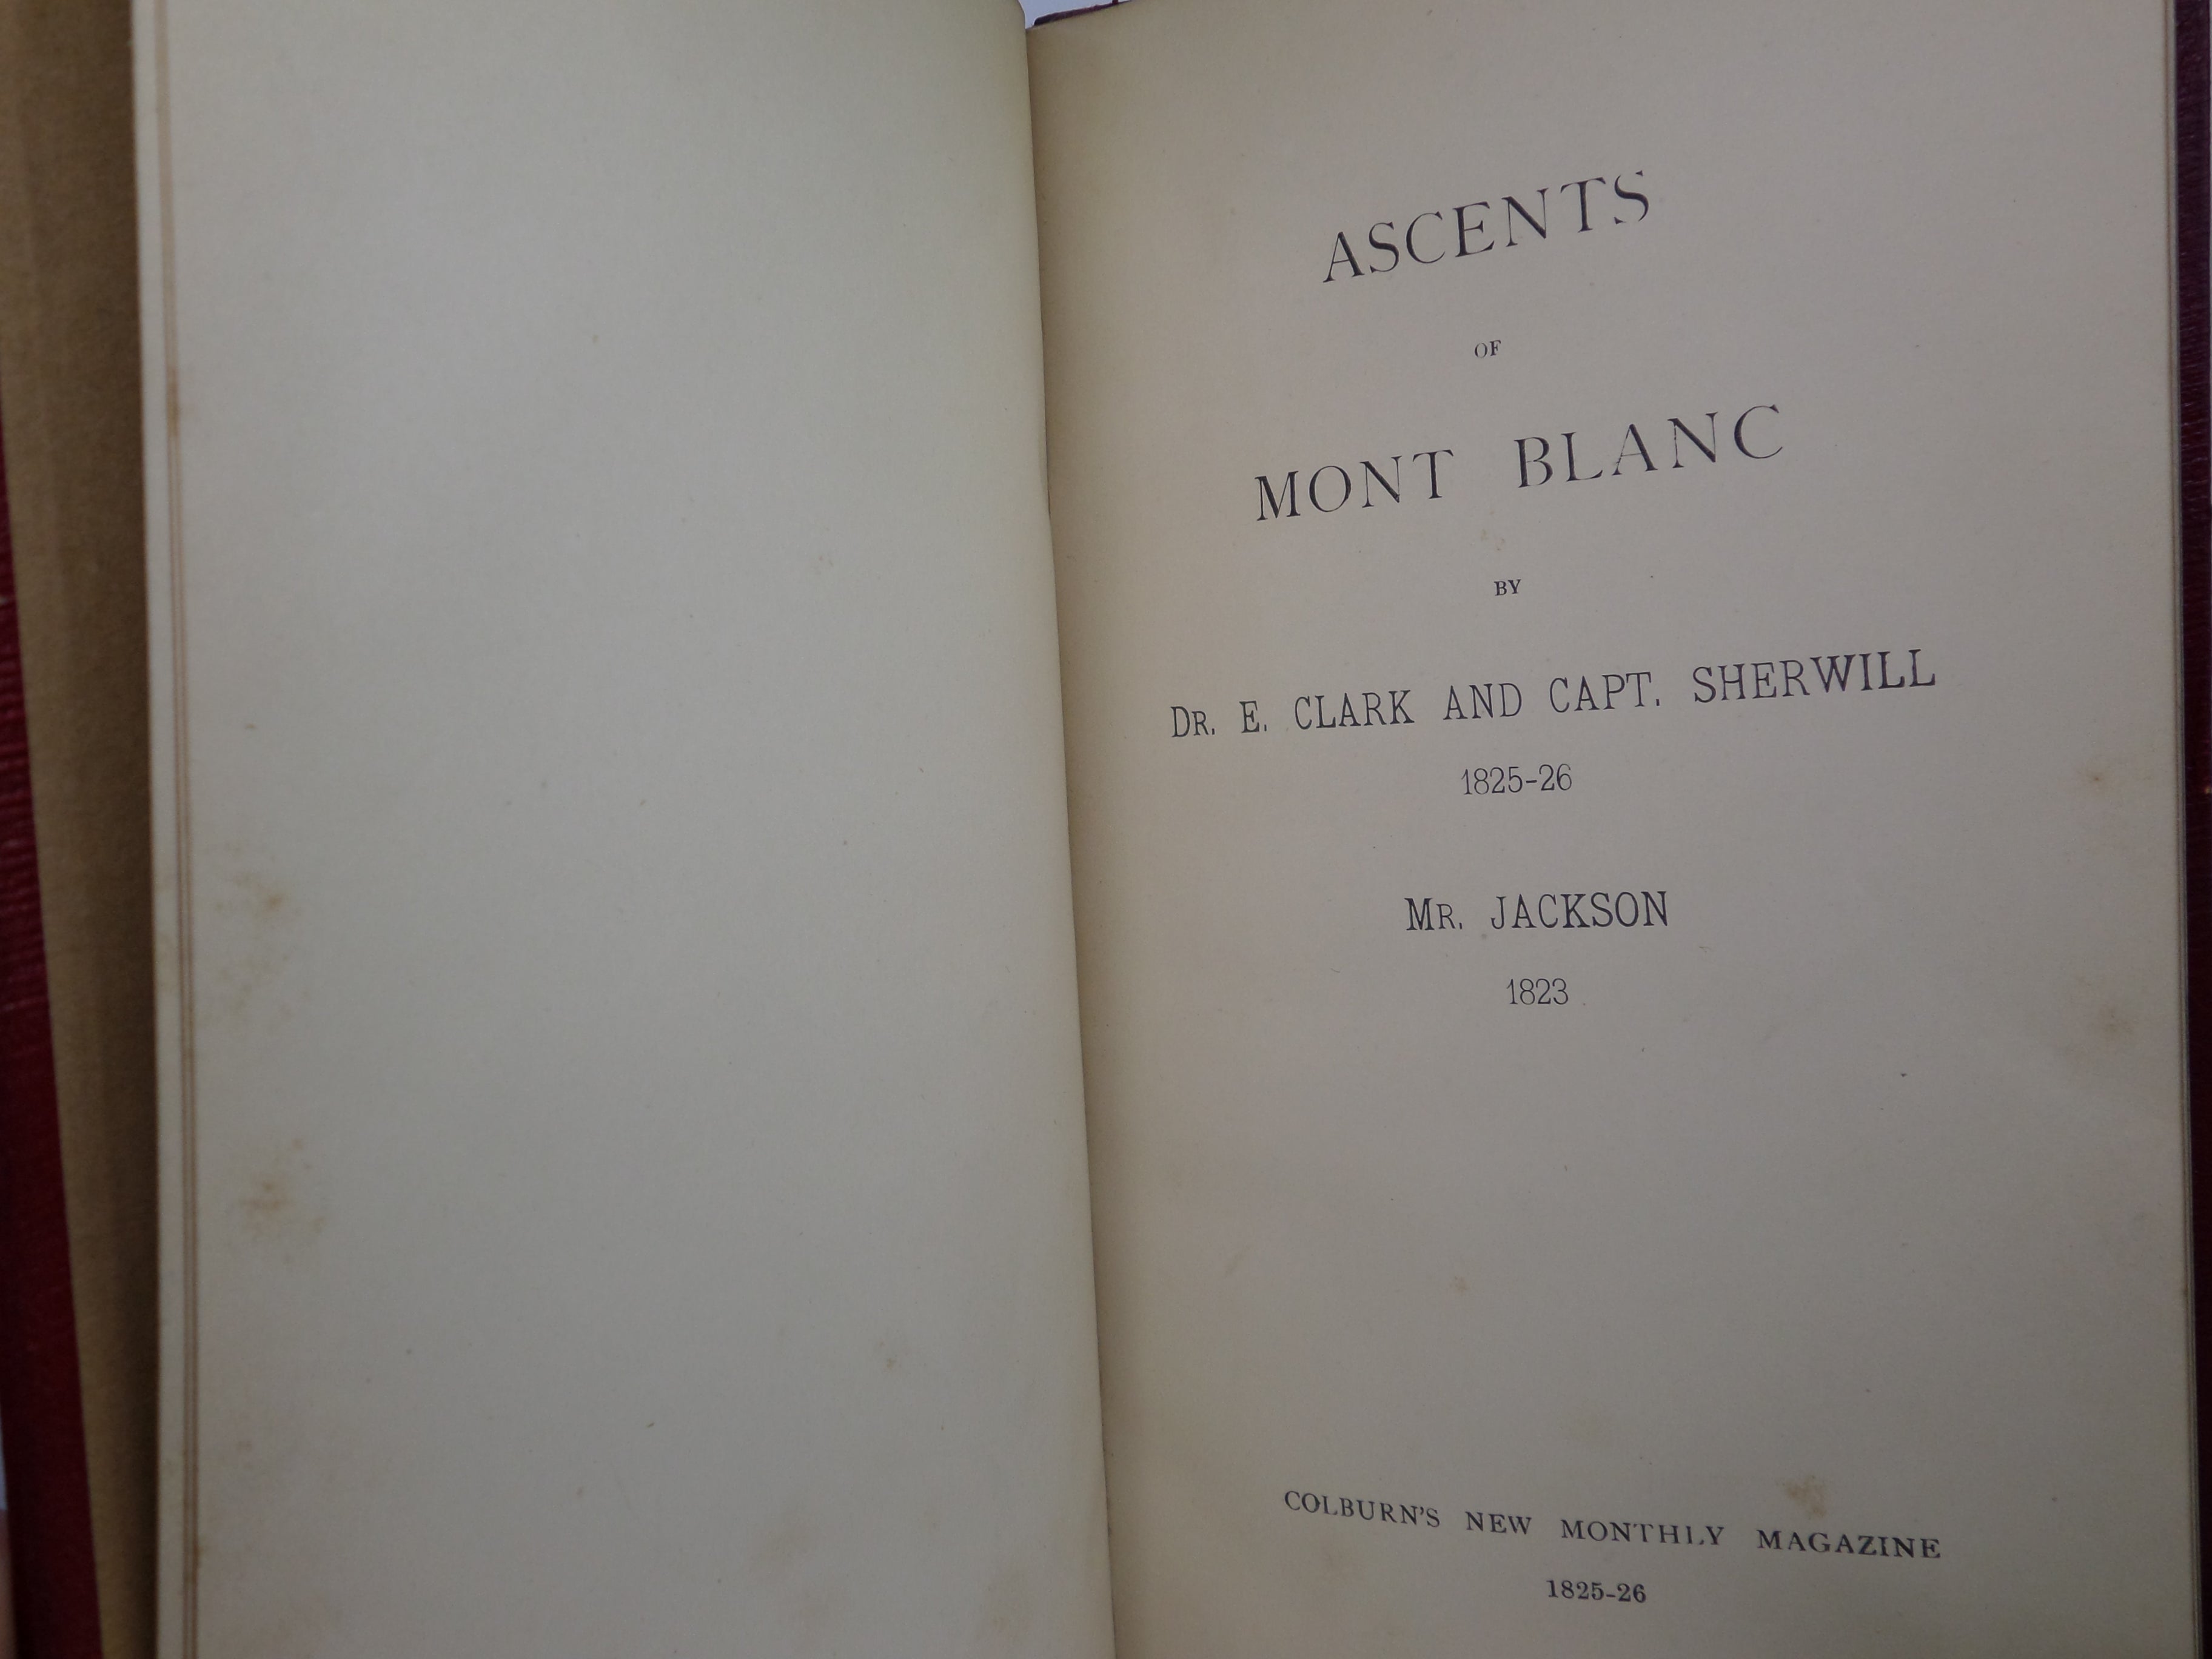 ASCENTS OF MONT BLANC BY DR E. CLARK AND CAPT. SHERWILL 1825-26; MR JACKSON 1823, COLBURN'S NEW MONTHLY MAGAZINE 1825-26